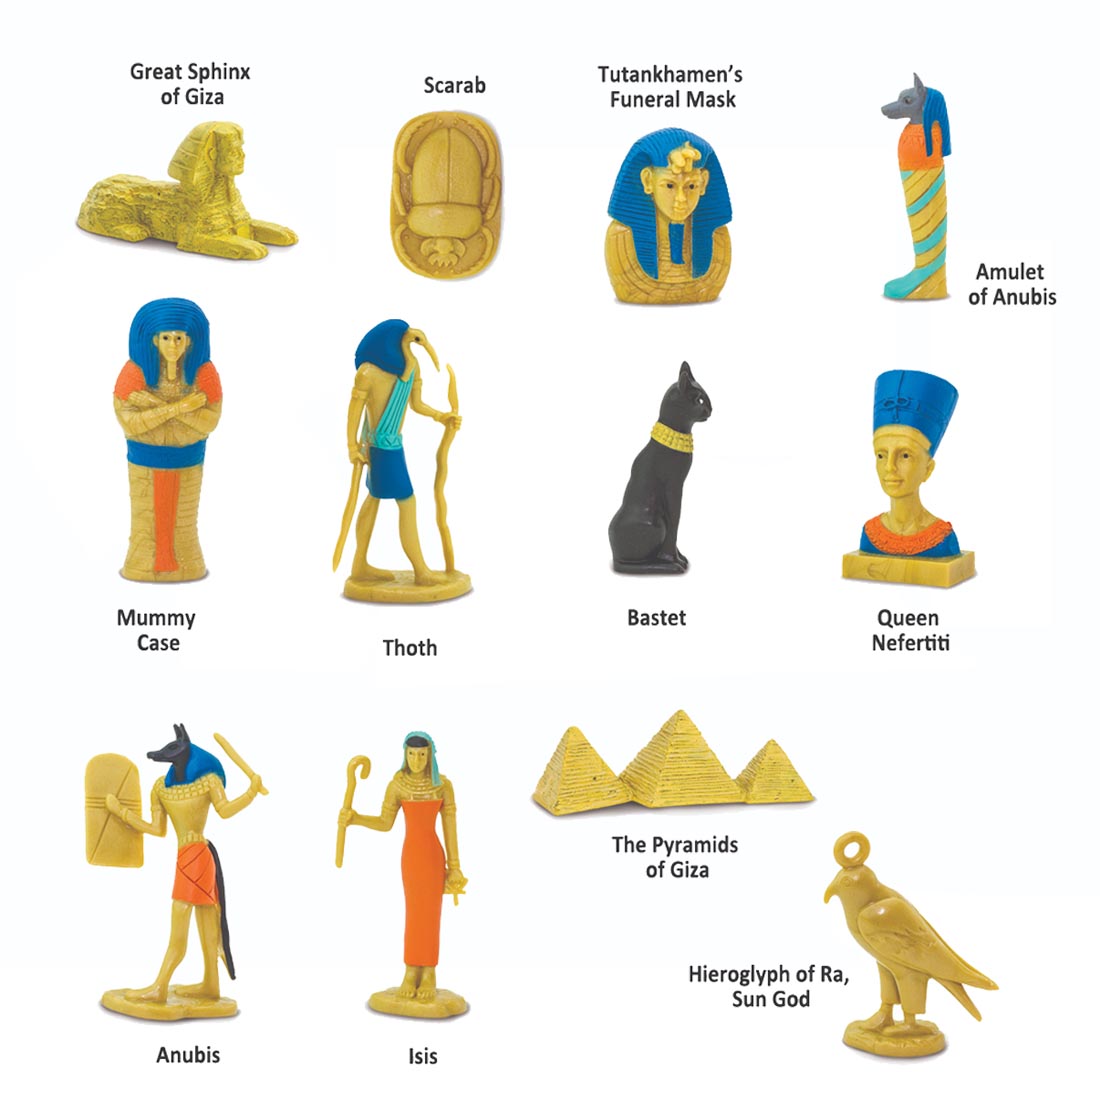 12 pieces from the Ancient Egypt Figurine Set labeled with their names